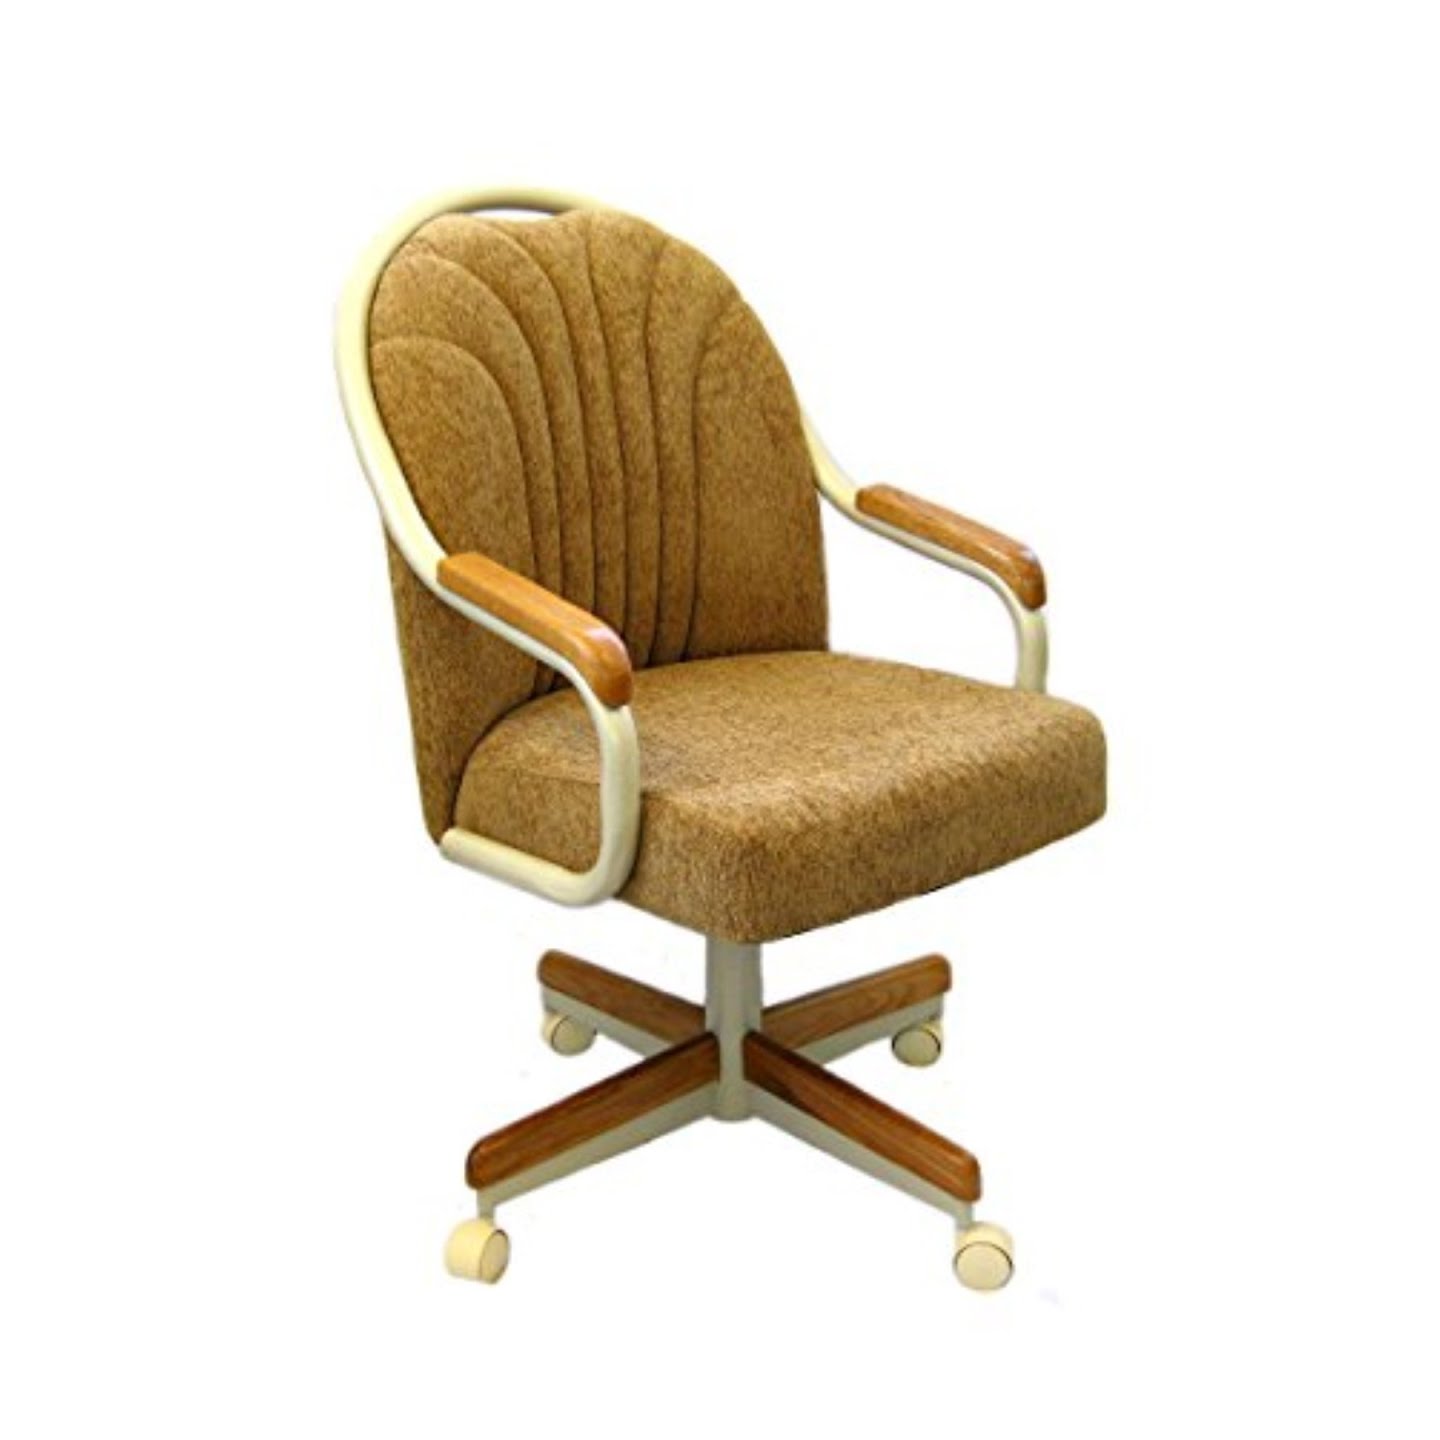 Dining Chairs With Casters Visualhunt, Dining Chairs On Casters Canada